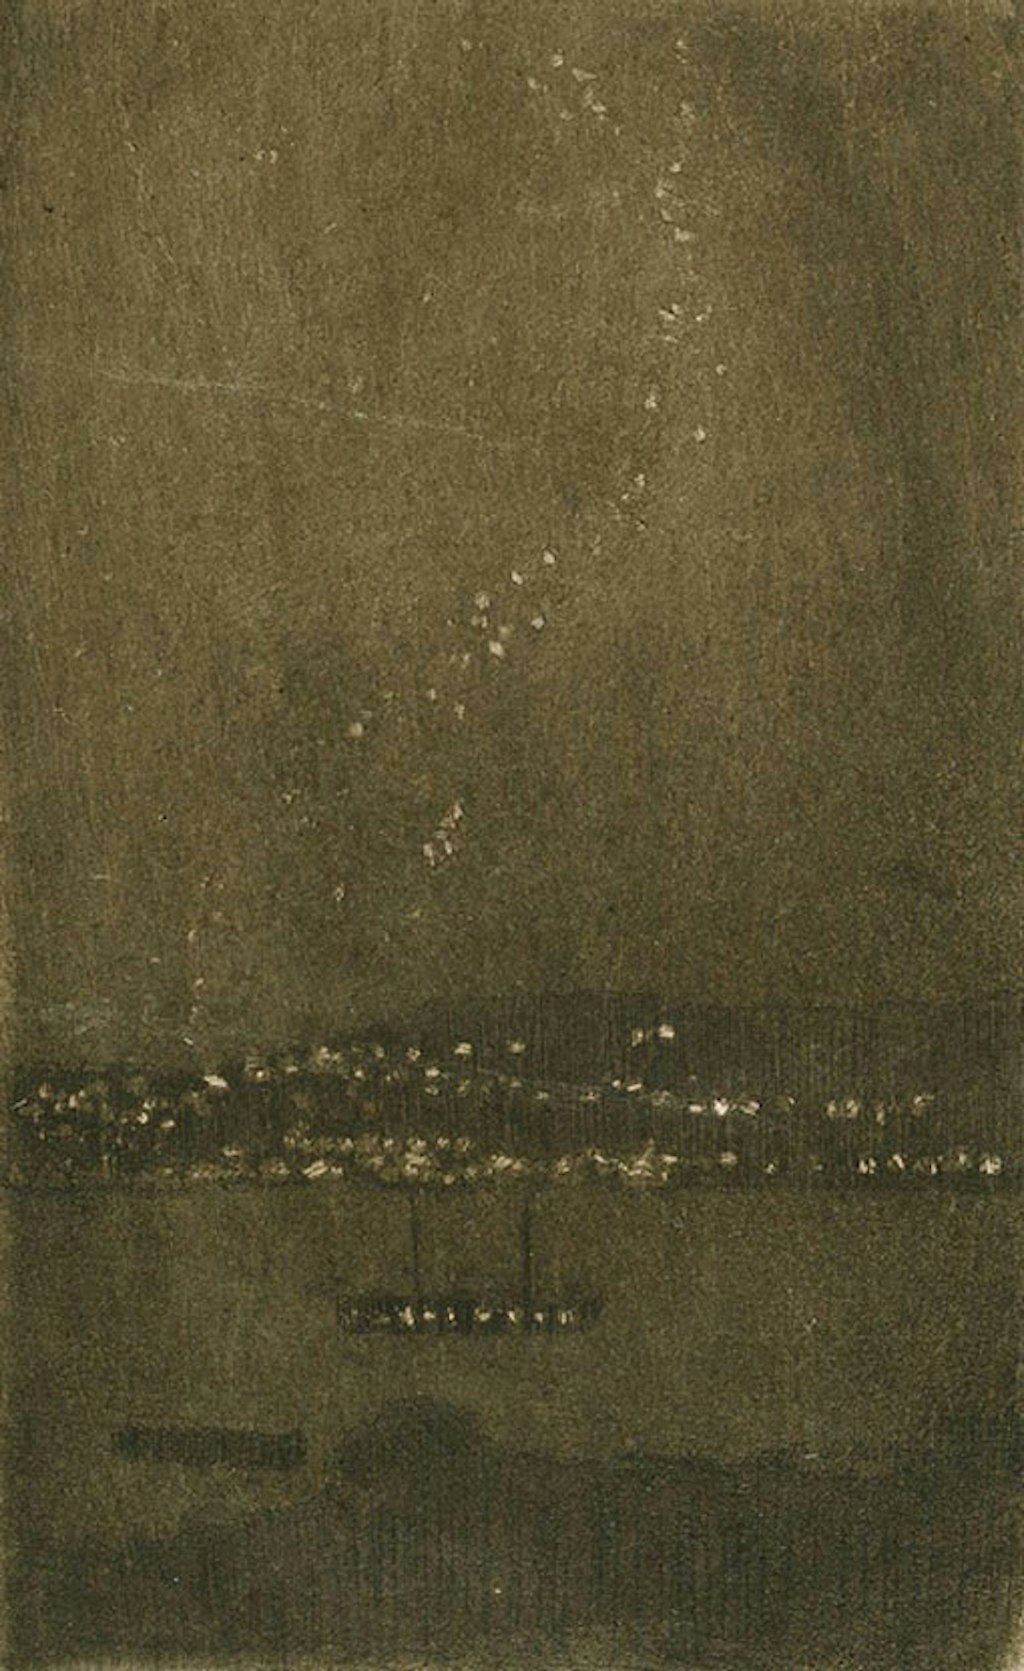 A harbour at night with a masted boat in the foreground, a distant shore with the lights of many buildings in the middle ground, and stars in the sky above.